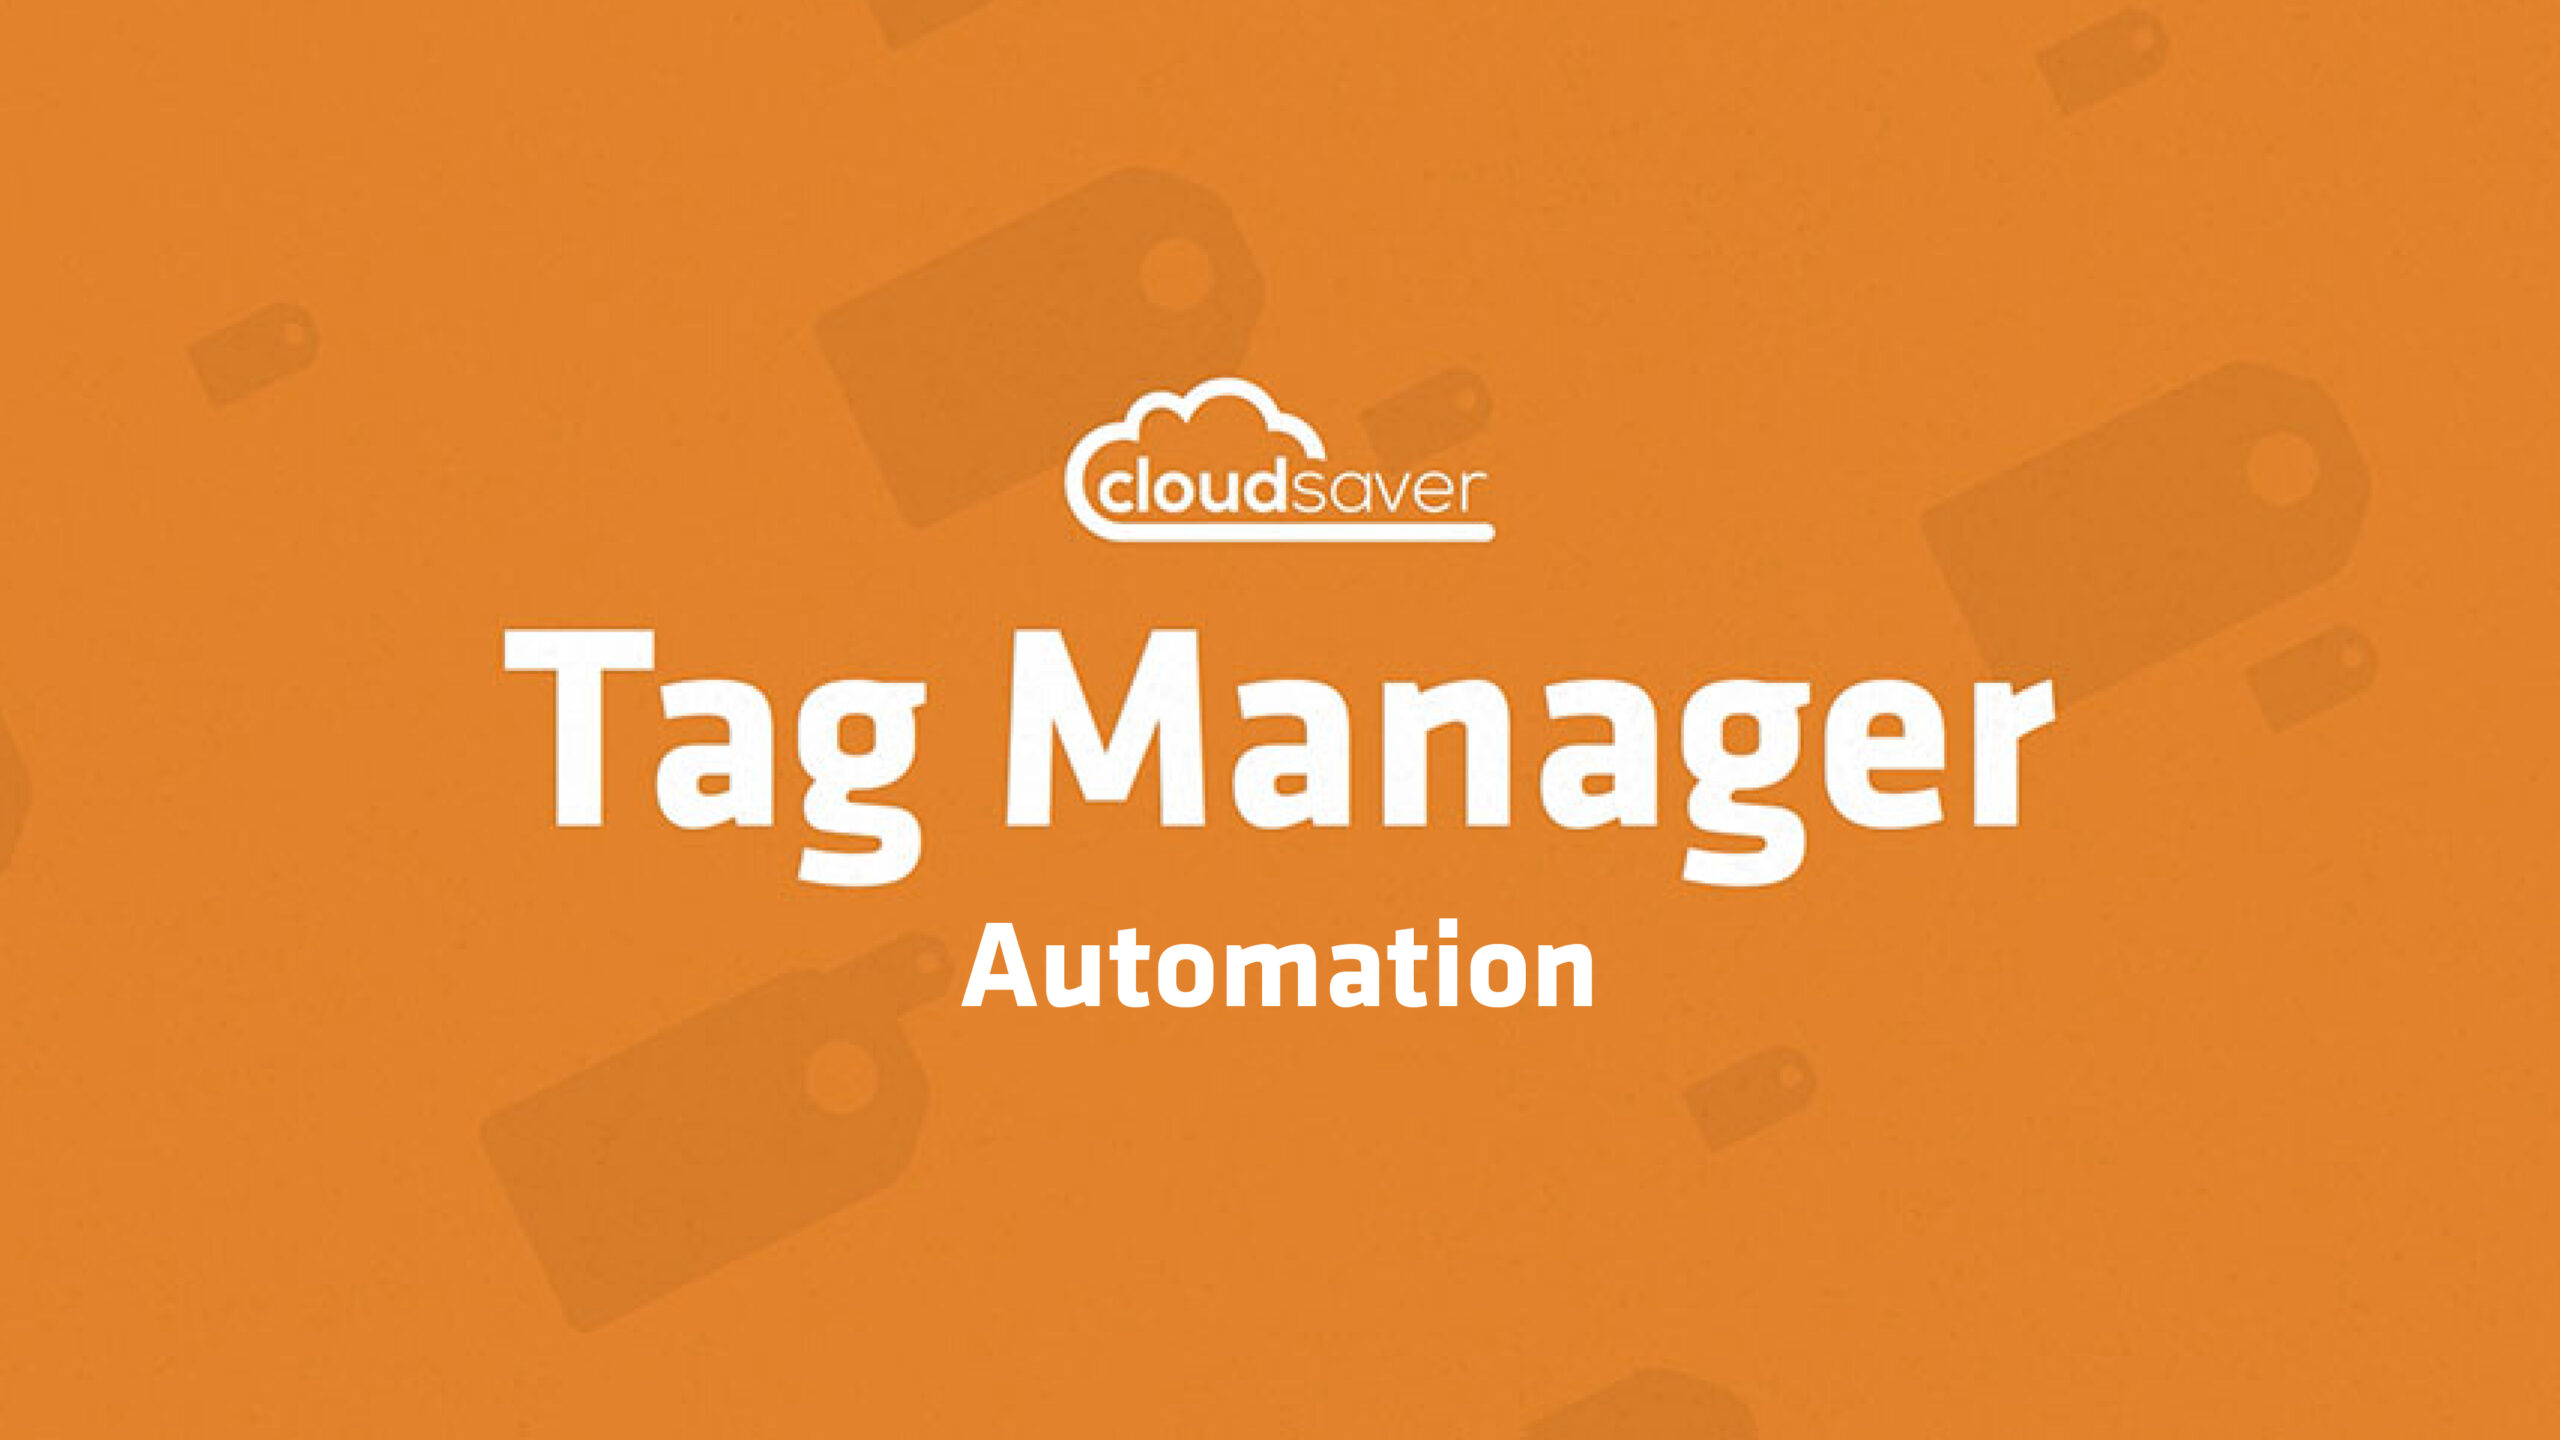 CloudSaver launches automation features for Tag Manager